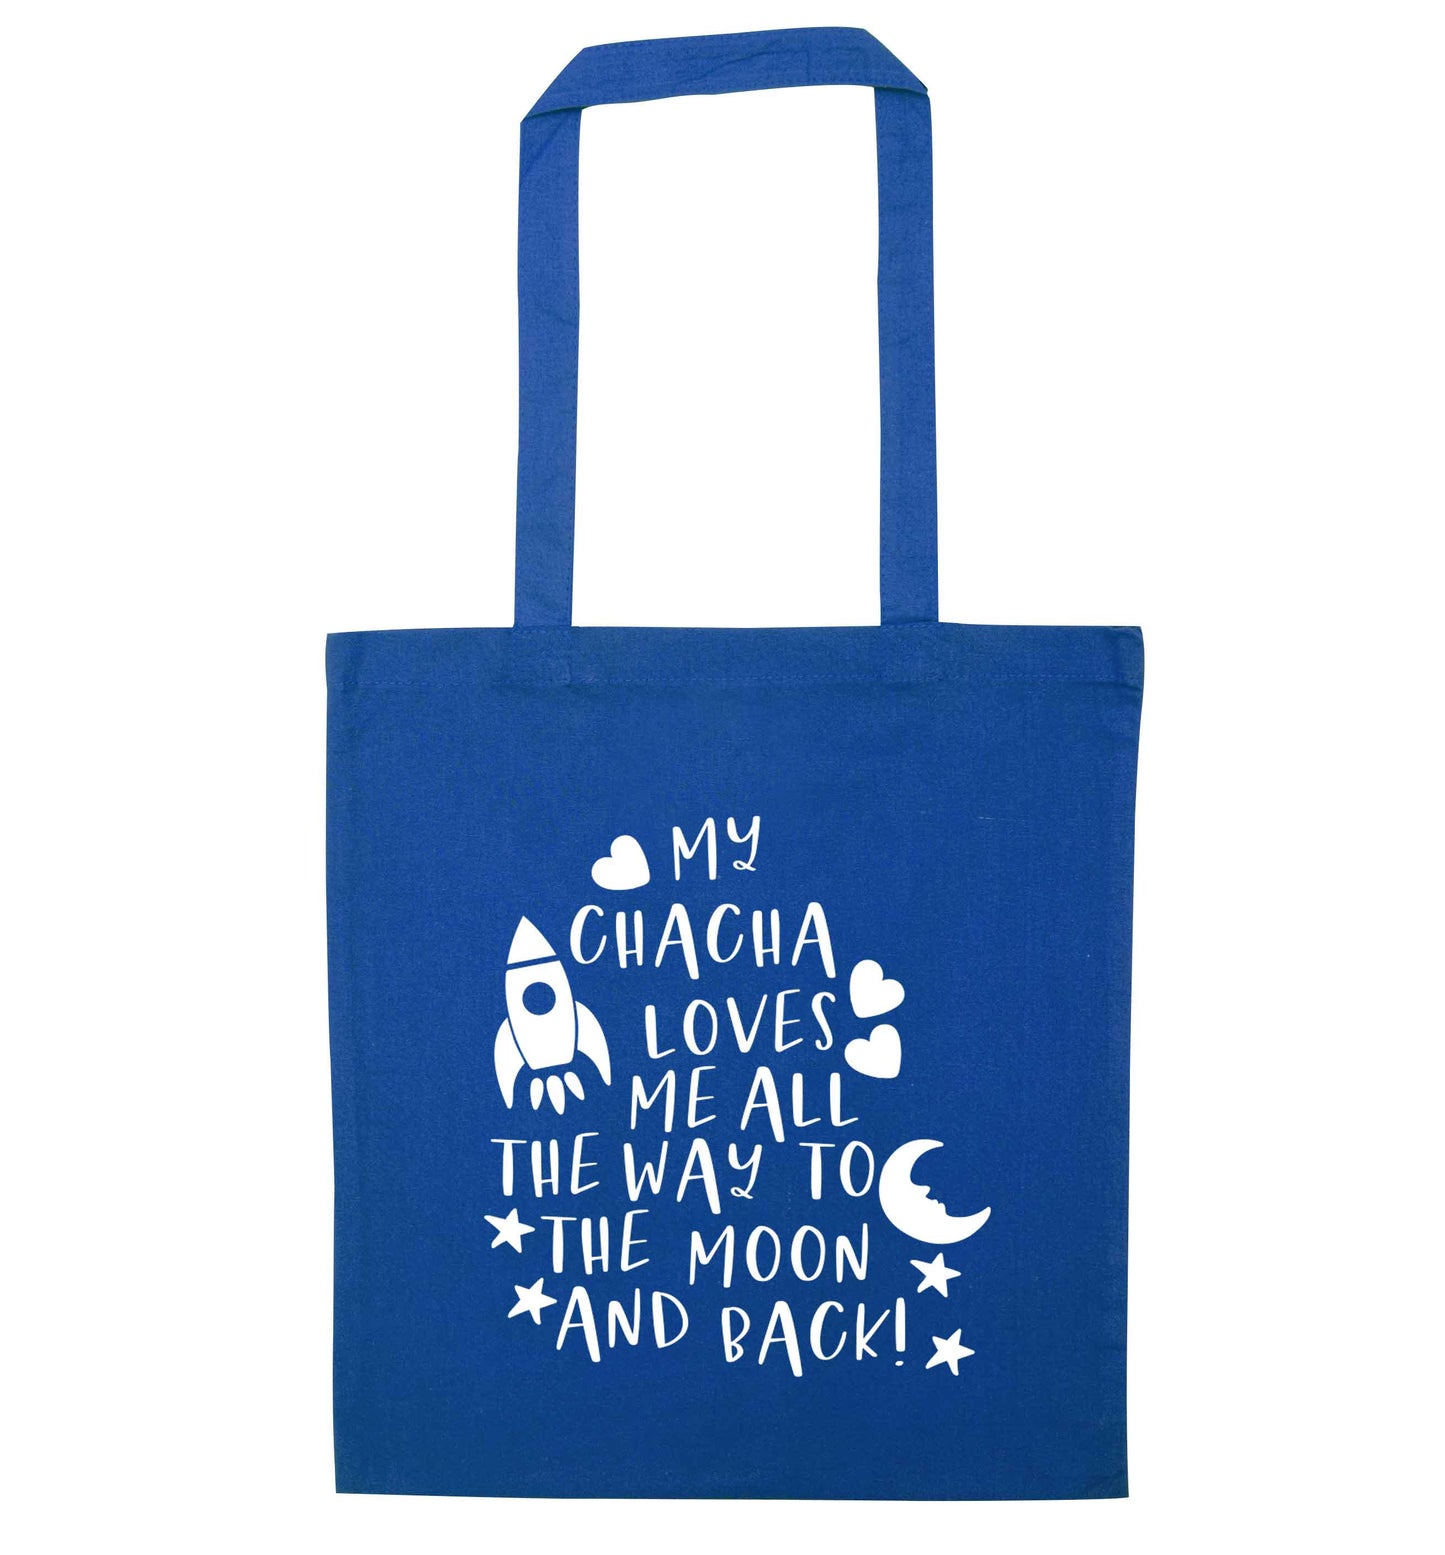 My chacha loves me all the way to the moon and back blue tote bag